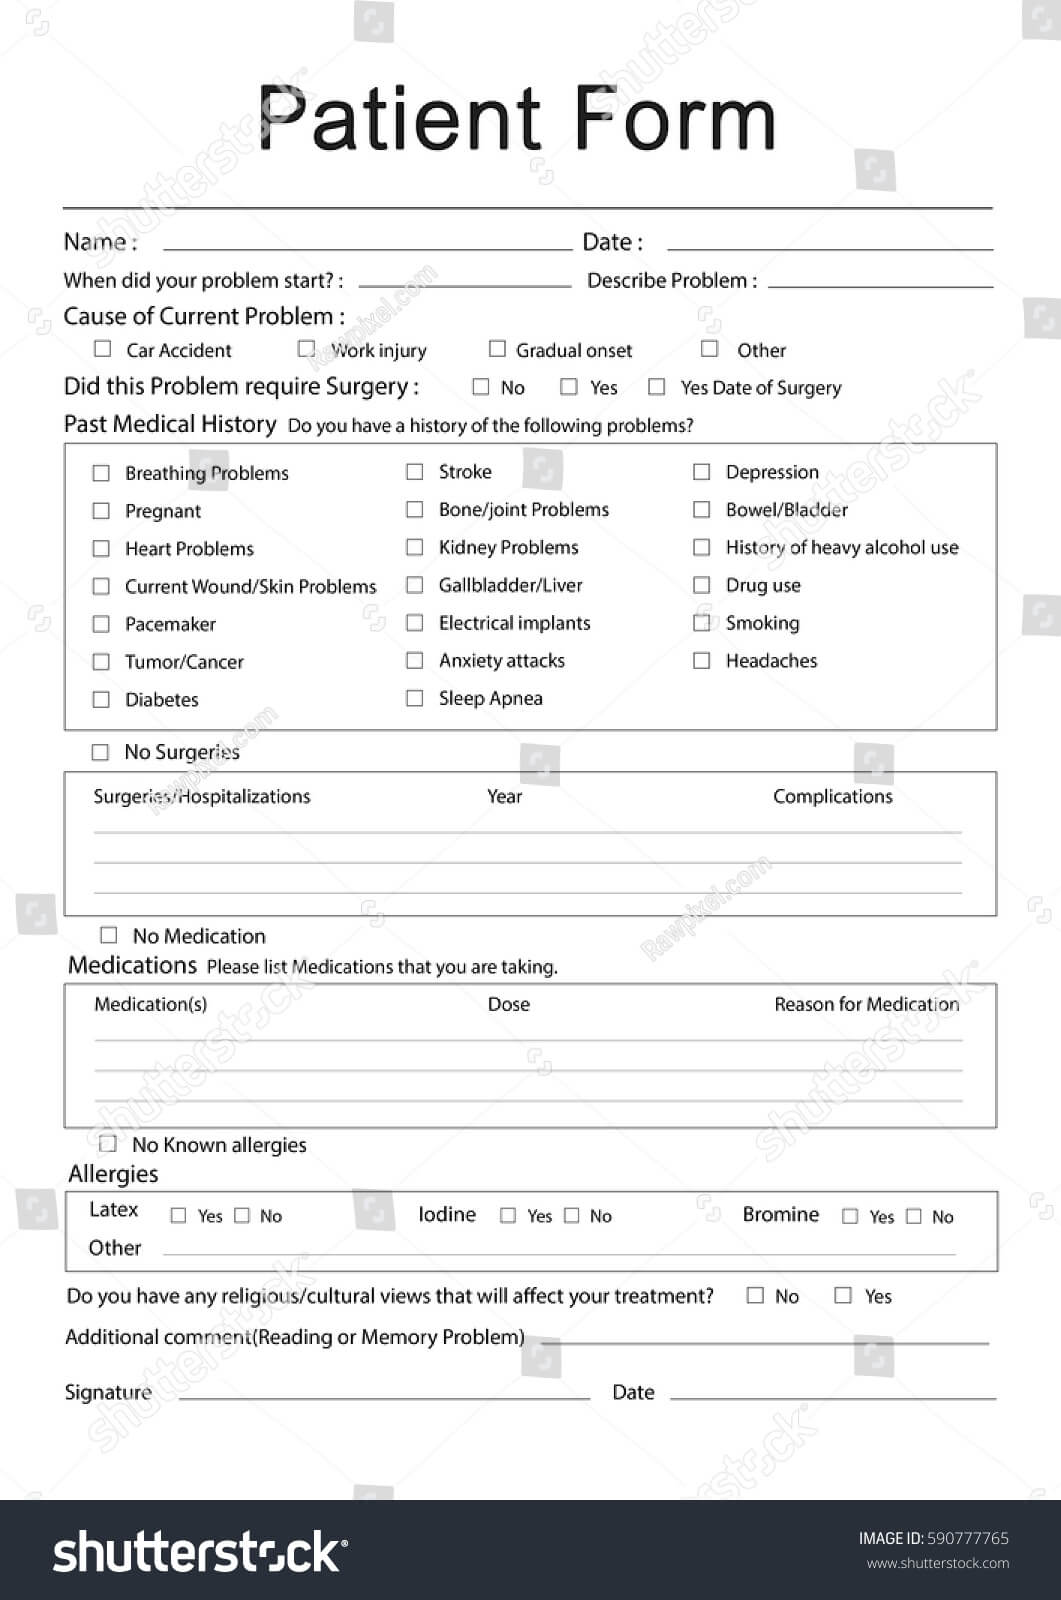 Cv Template Word Norsk | Resume Pdf Download With Regard To Patient Report Form Template Download